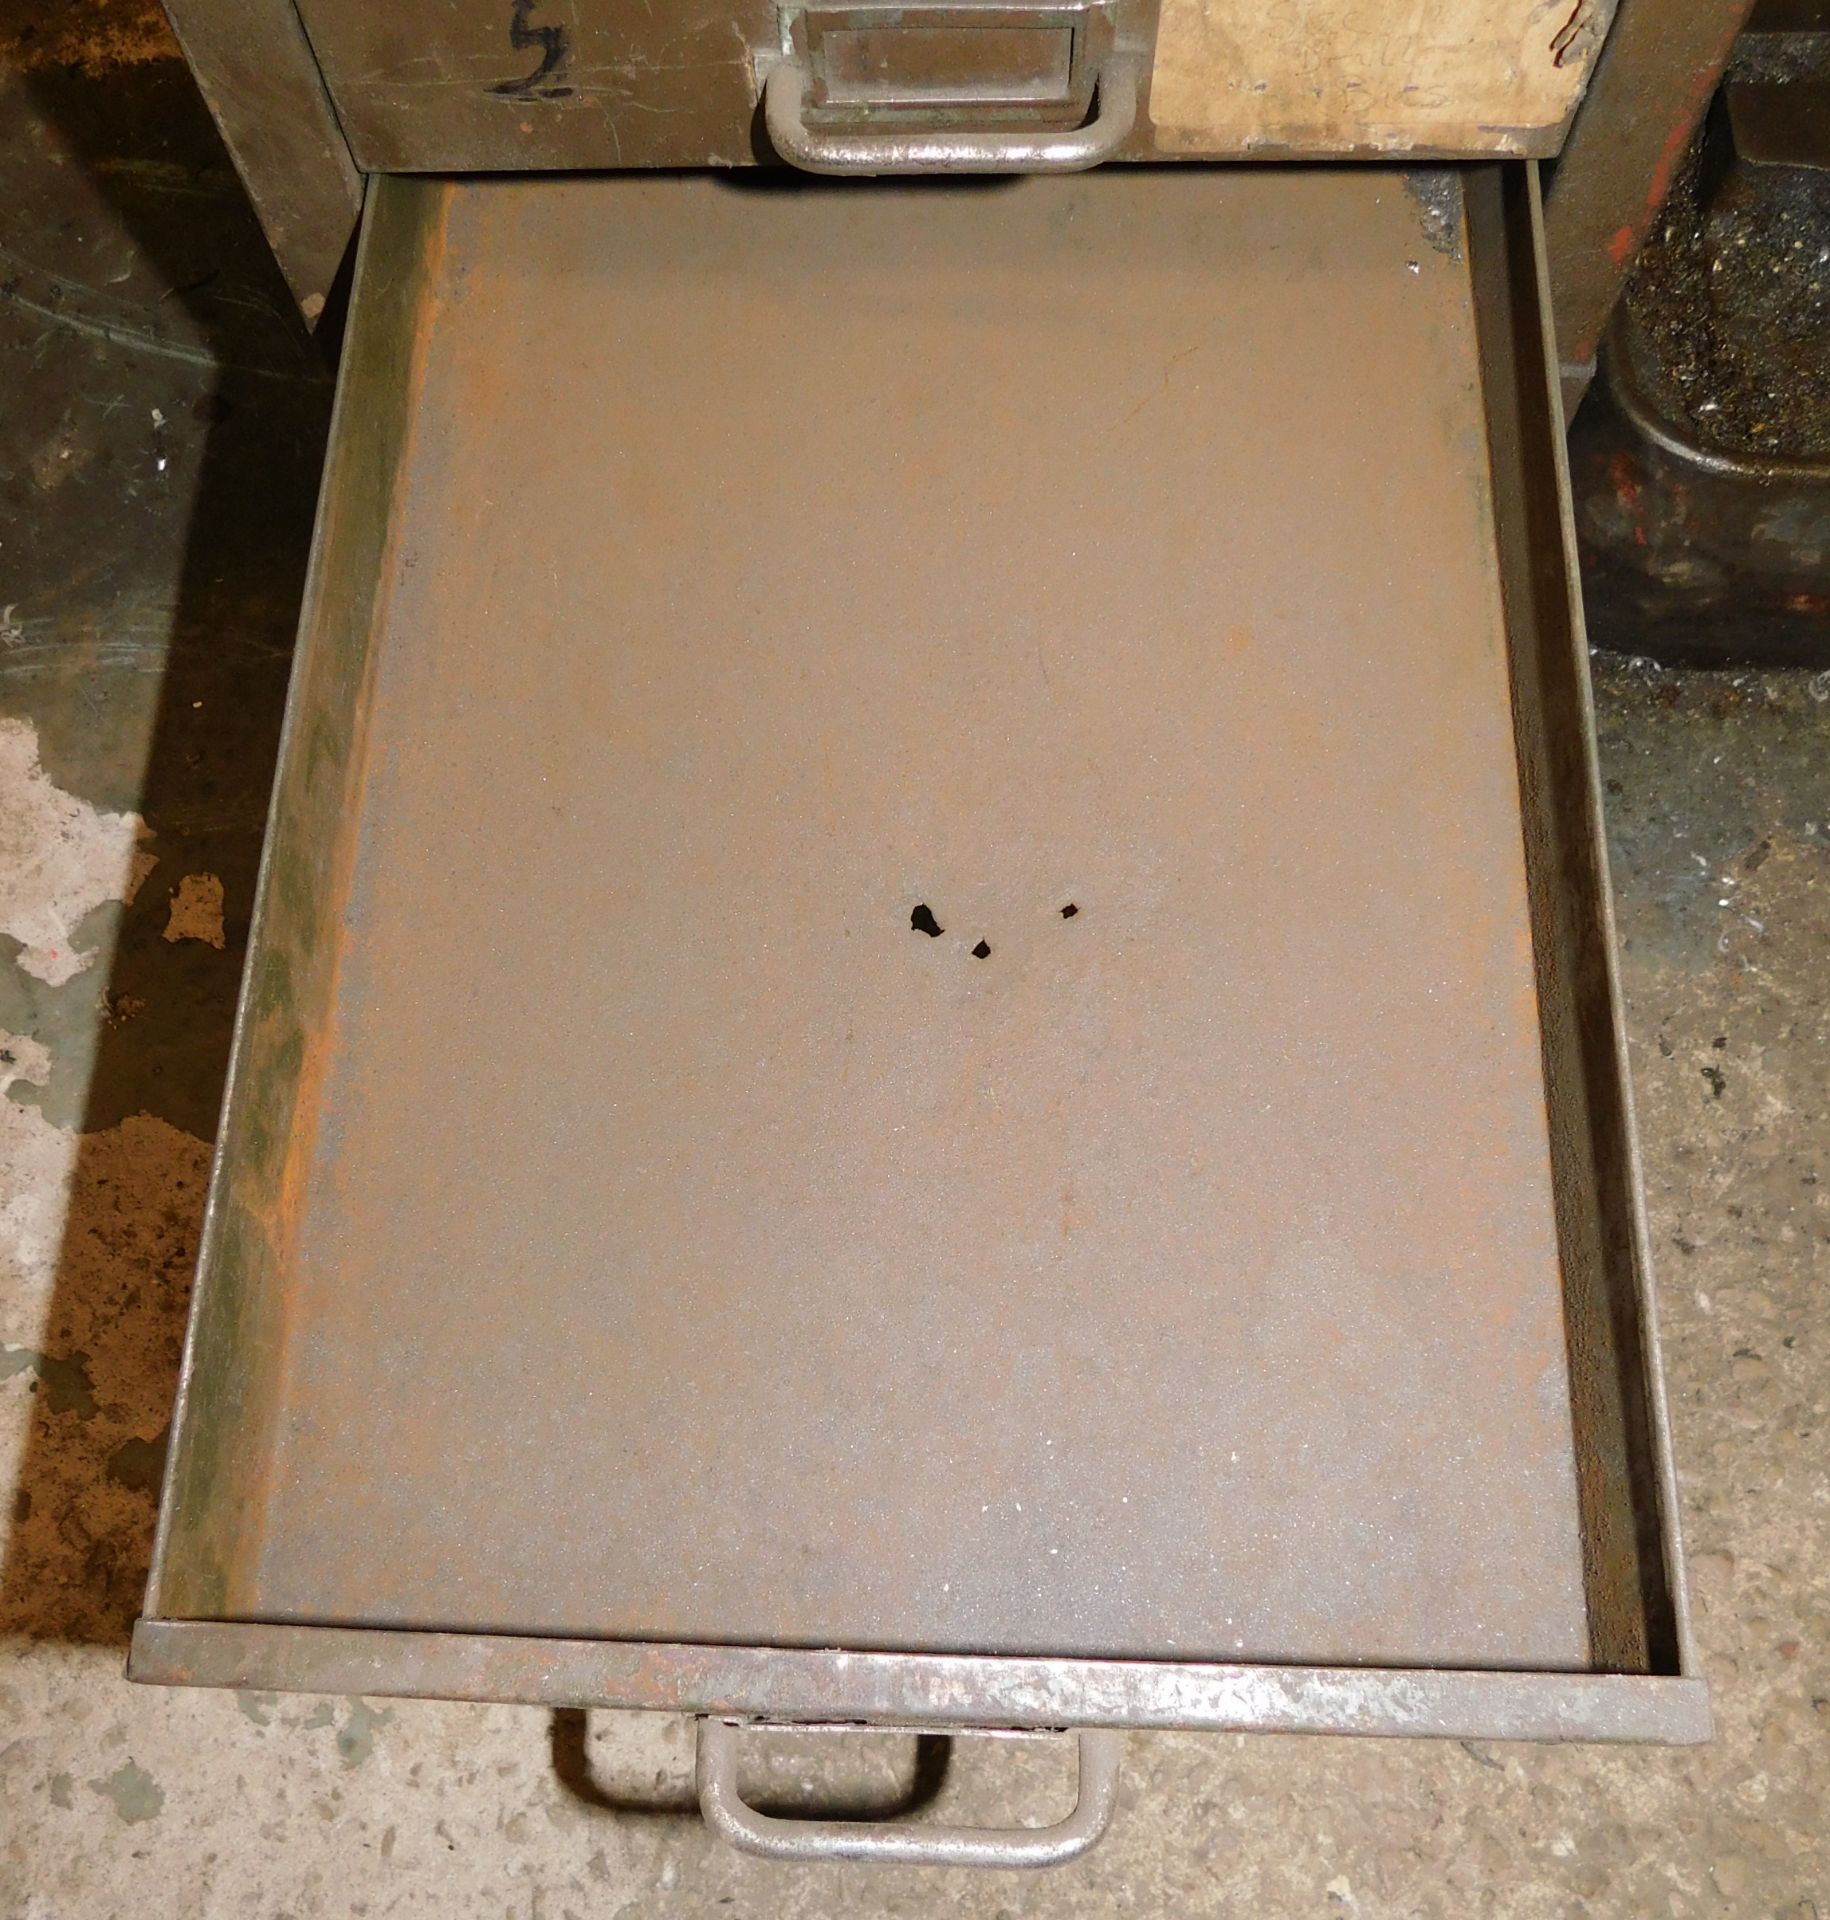 Progress No 3A Pillar Drill, Serial Number; 2348640 with Multi Draw Cabinet of Drill Bits etc. ( - Image 21 of 21